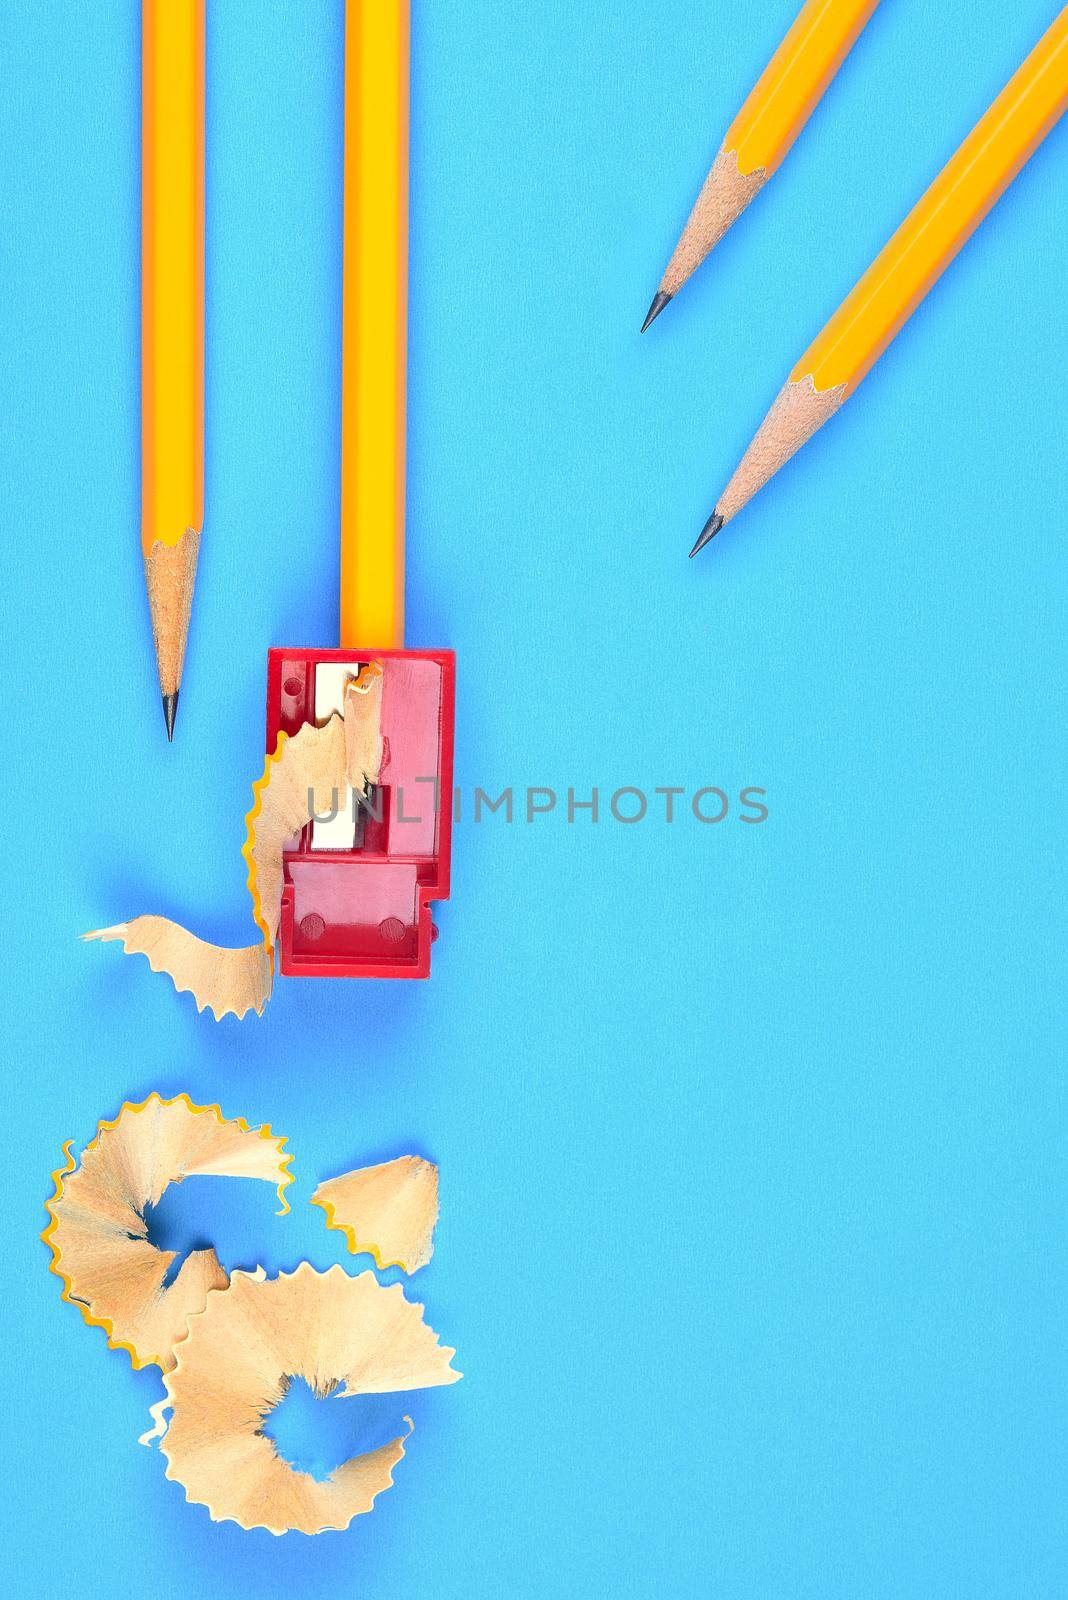 Back to School Concept: Four Yellow Pencils with a sharpener and shavings, on a blue background. Two pencils coming in from the to right, Copy space ont he bott right third.